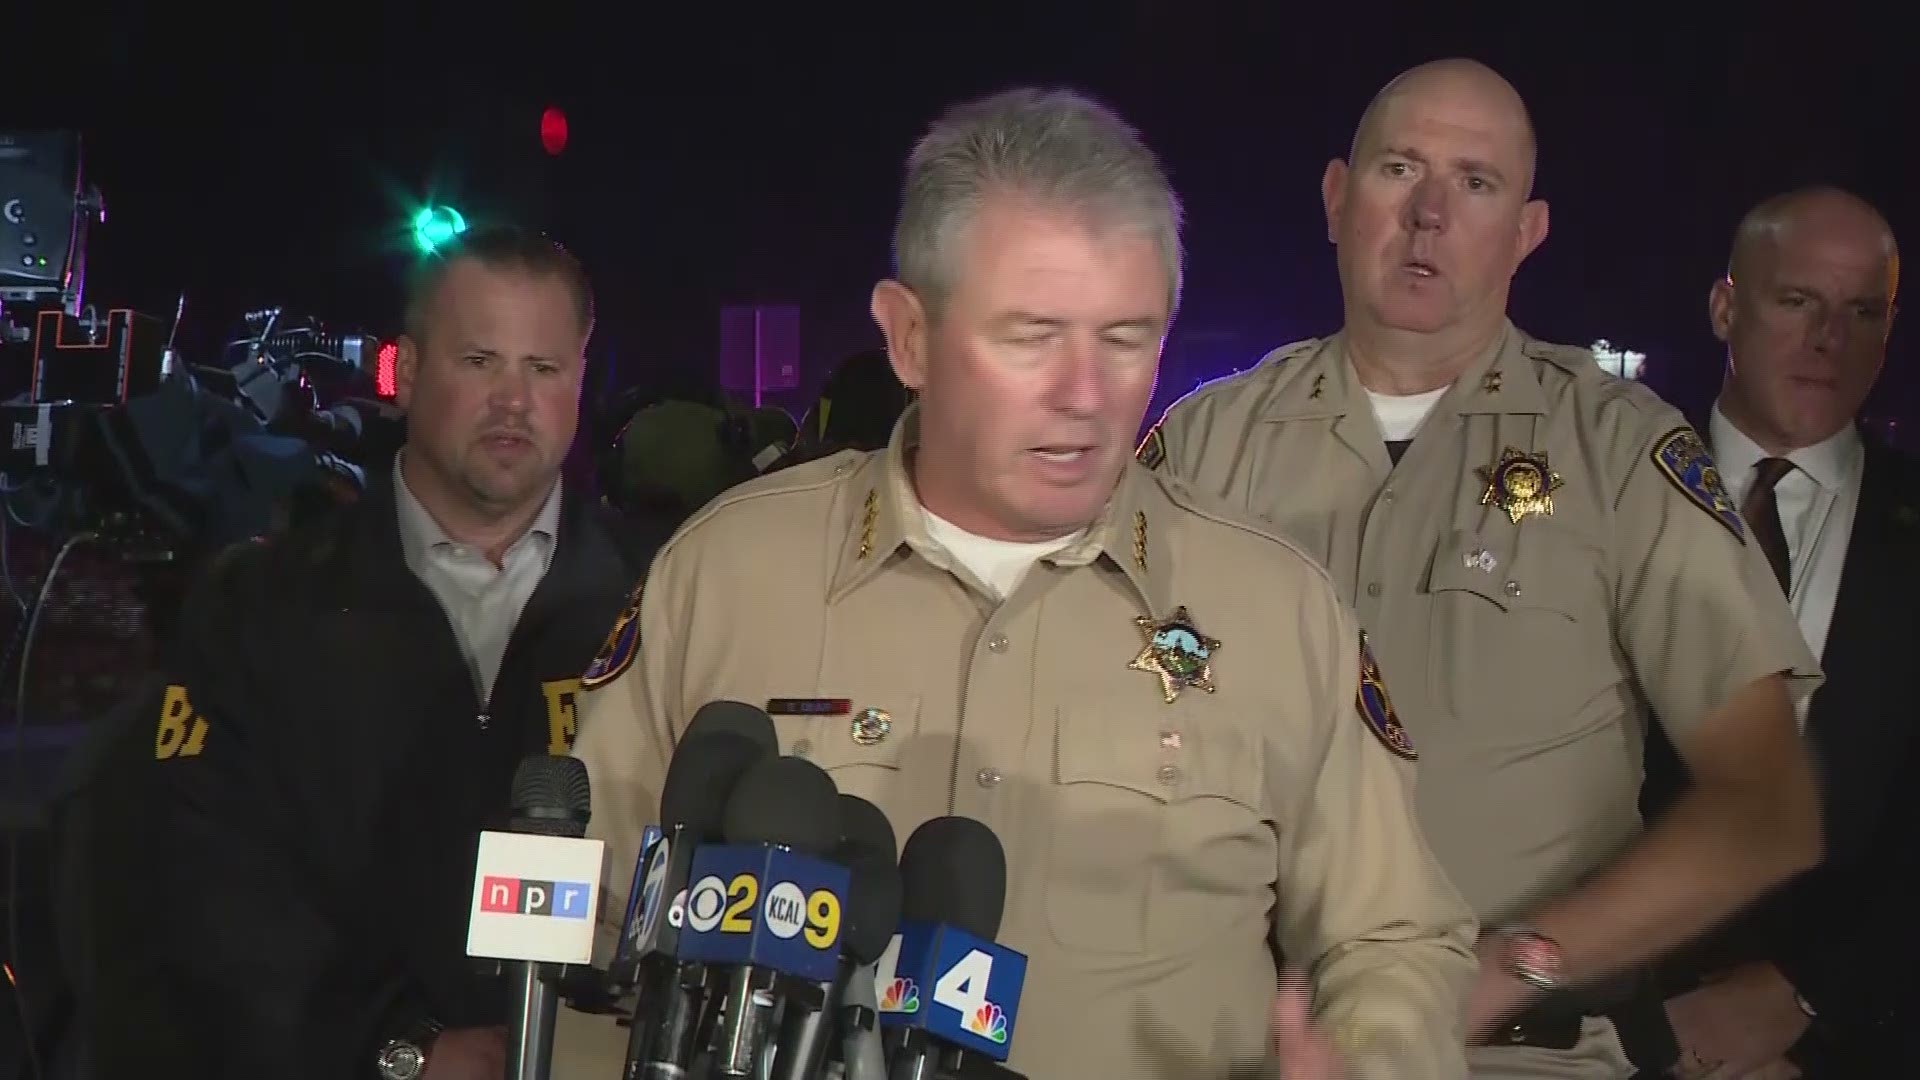 At least 12 victims are dead, including a deputy, in a shooting at a bar in Thousand Oaks. Police say the suspect is dead.